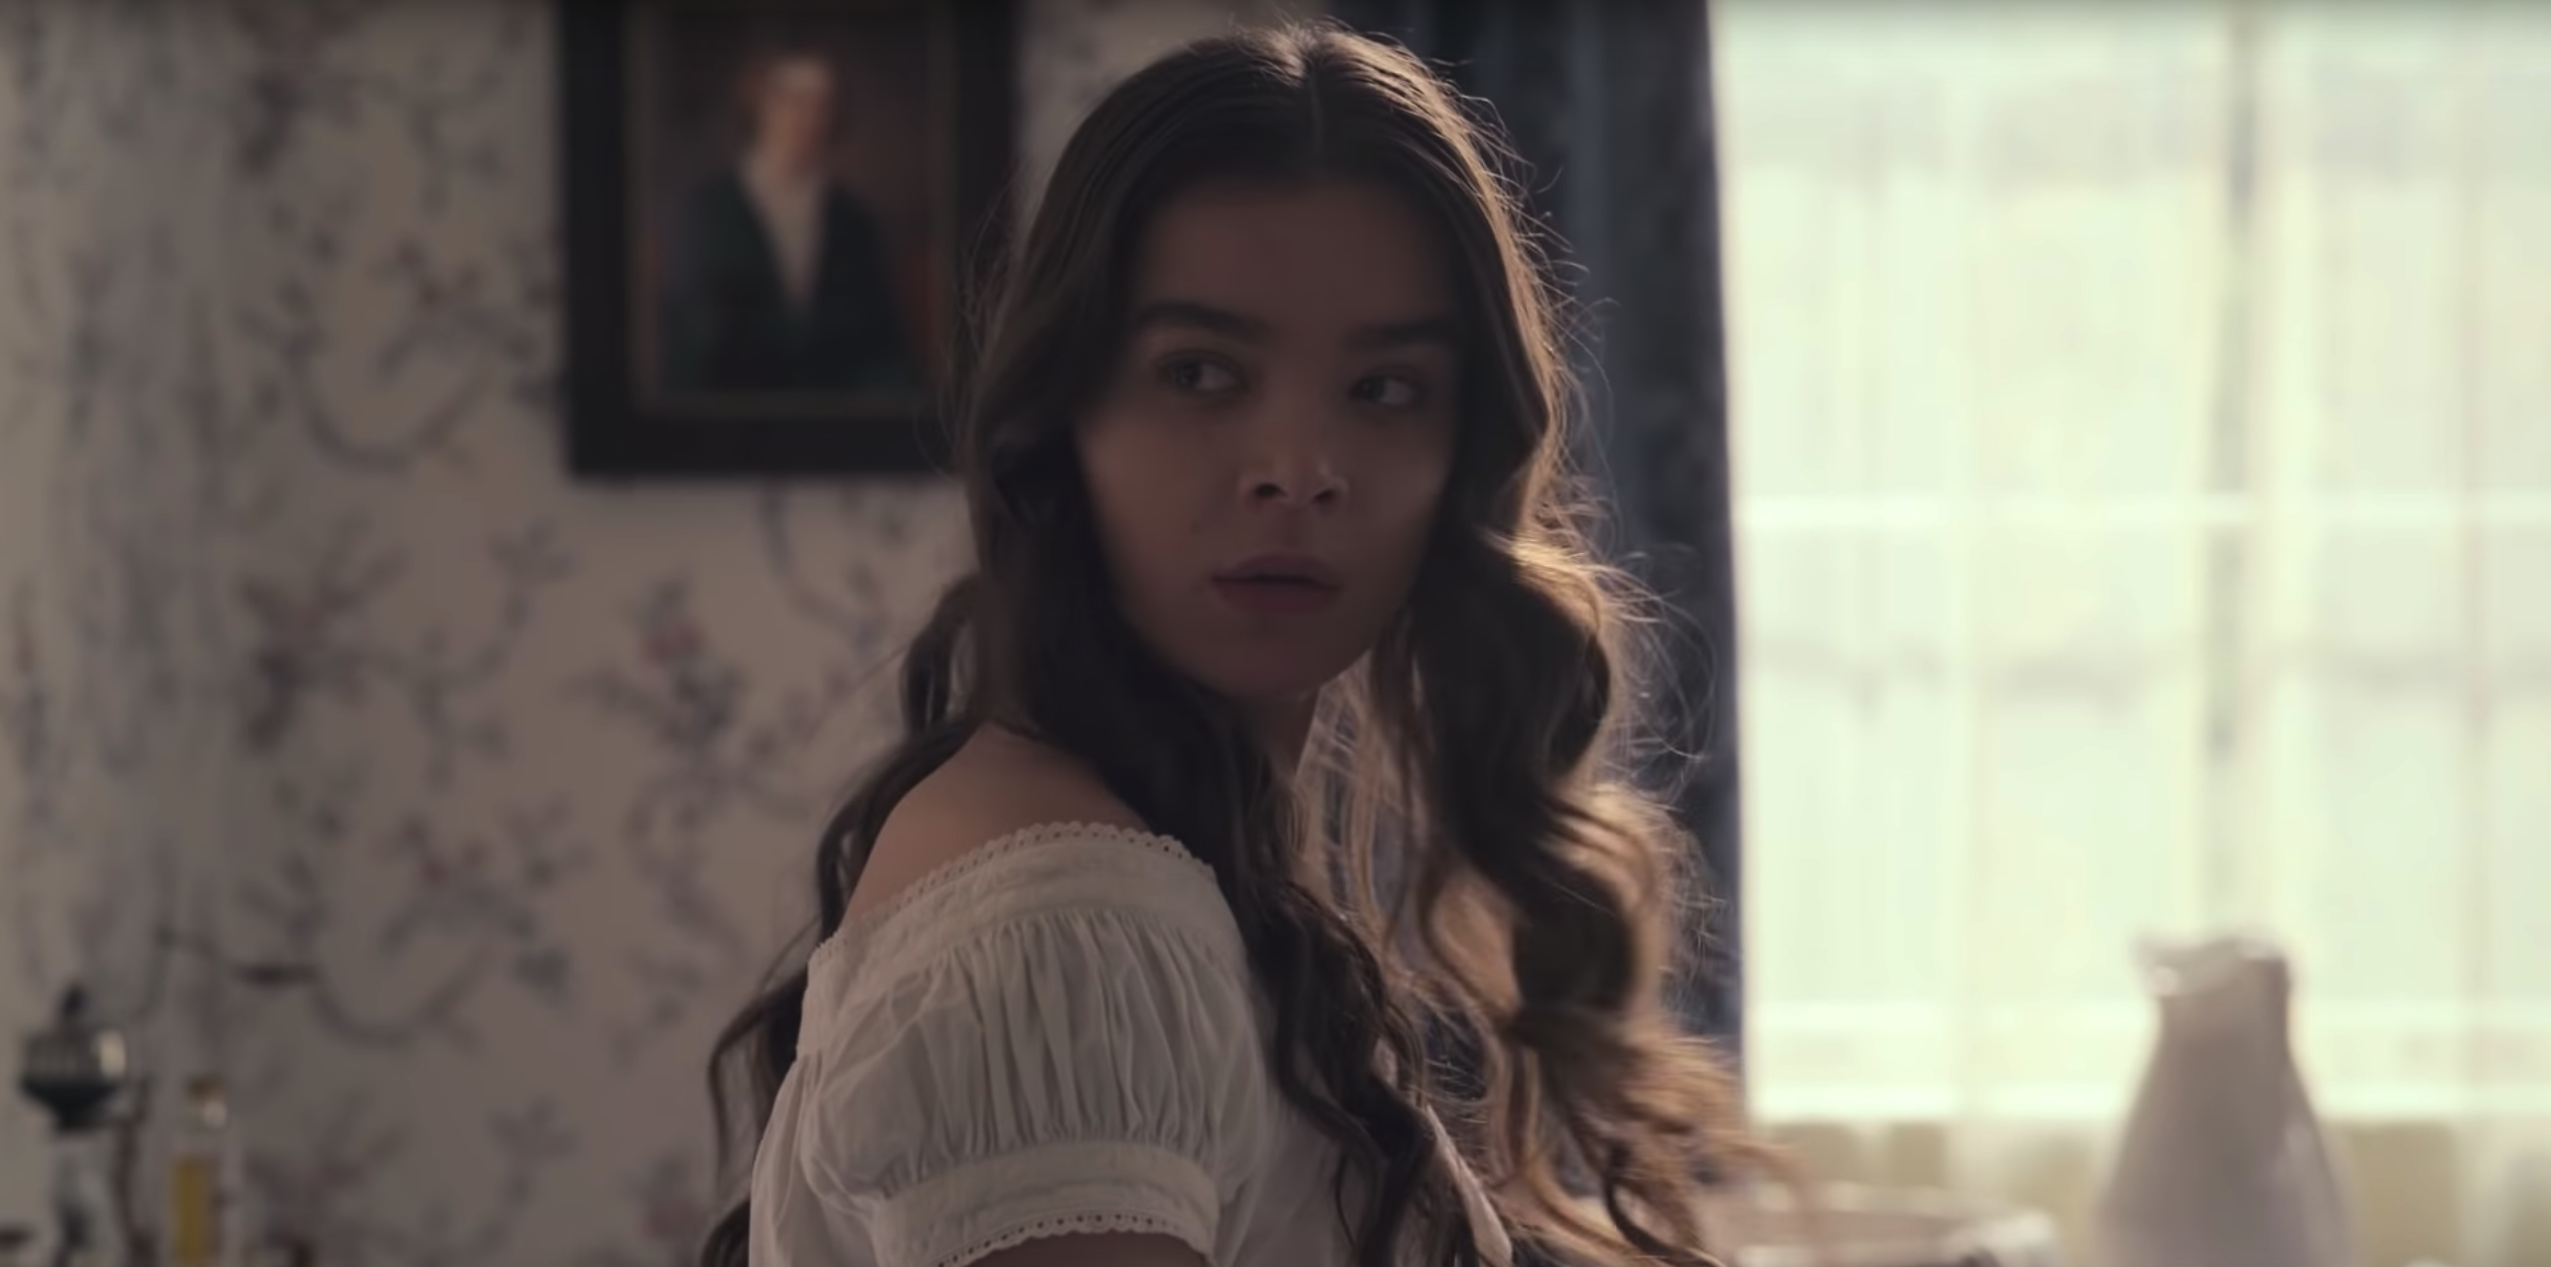 Apple TV+'s Dickinson: Trailer, Cast, Premiere Date, How to Watch